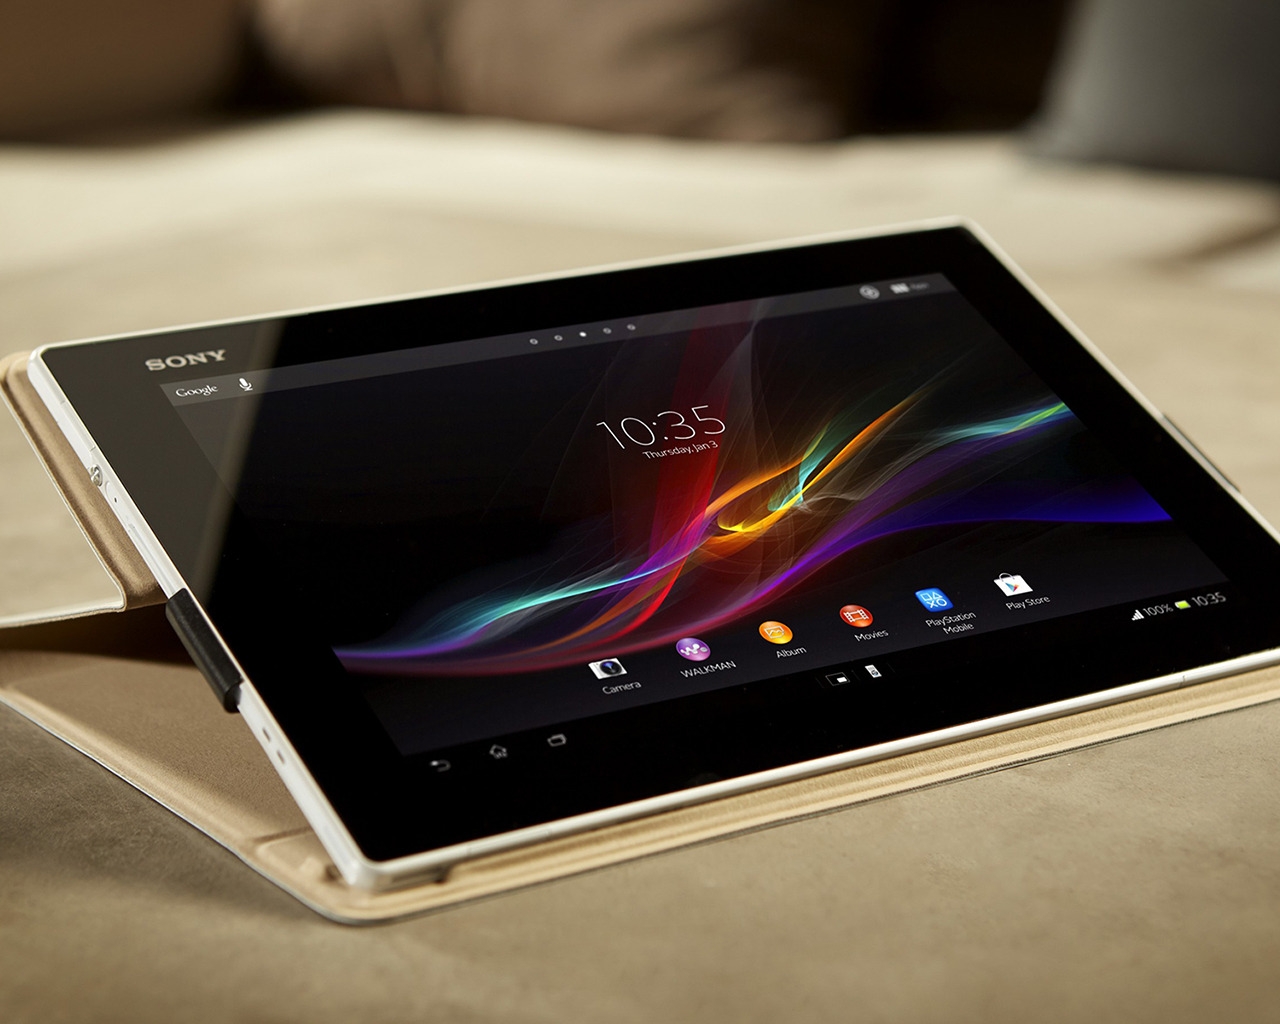 Sony Xperia Tablet Z for 1280 x 1024 resolution